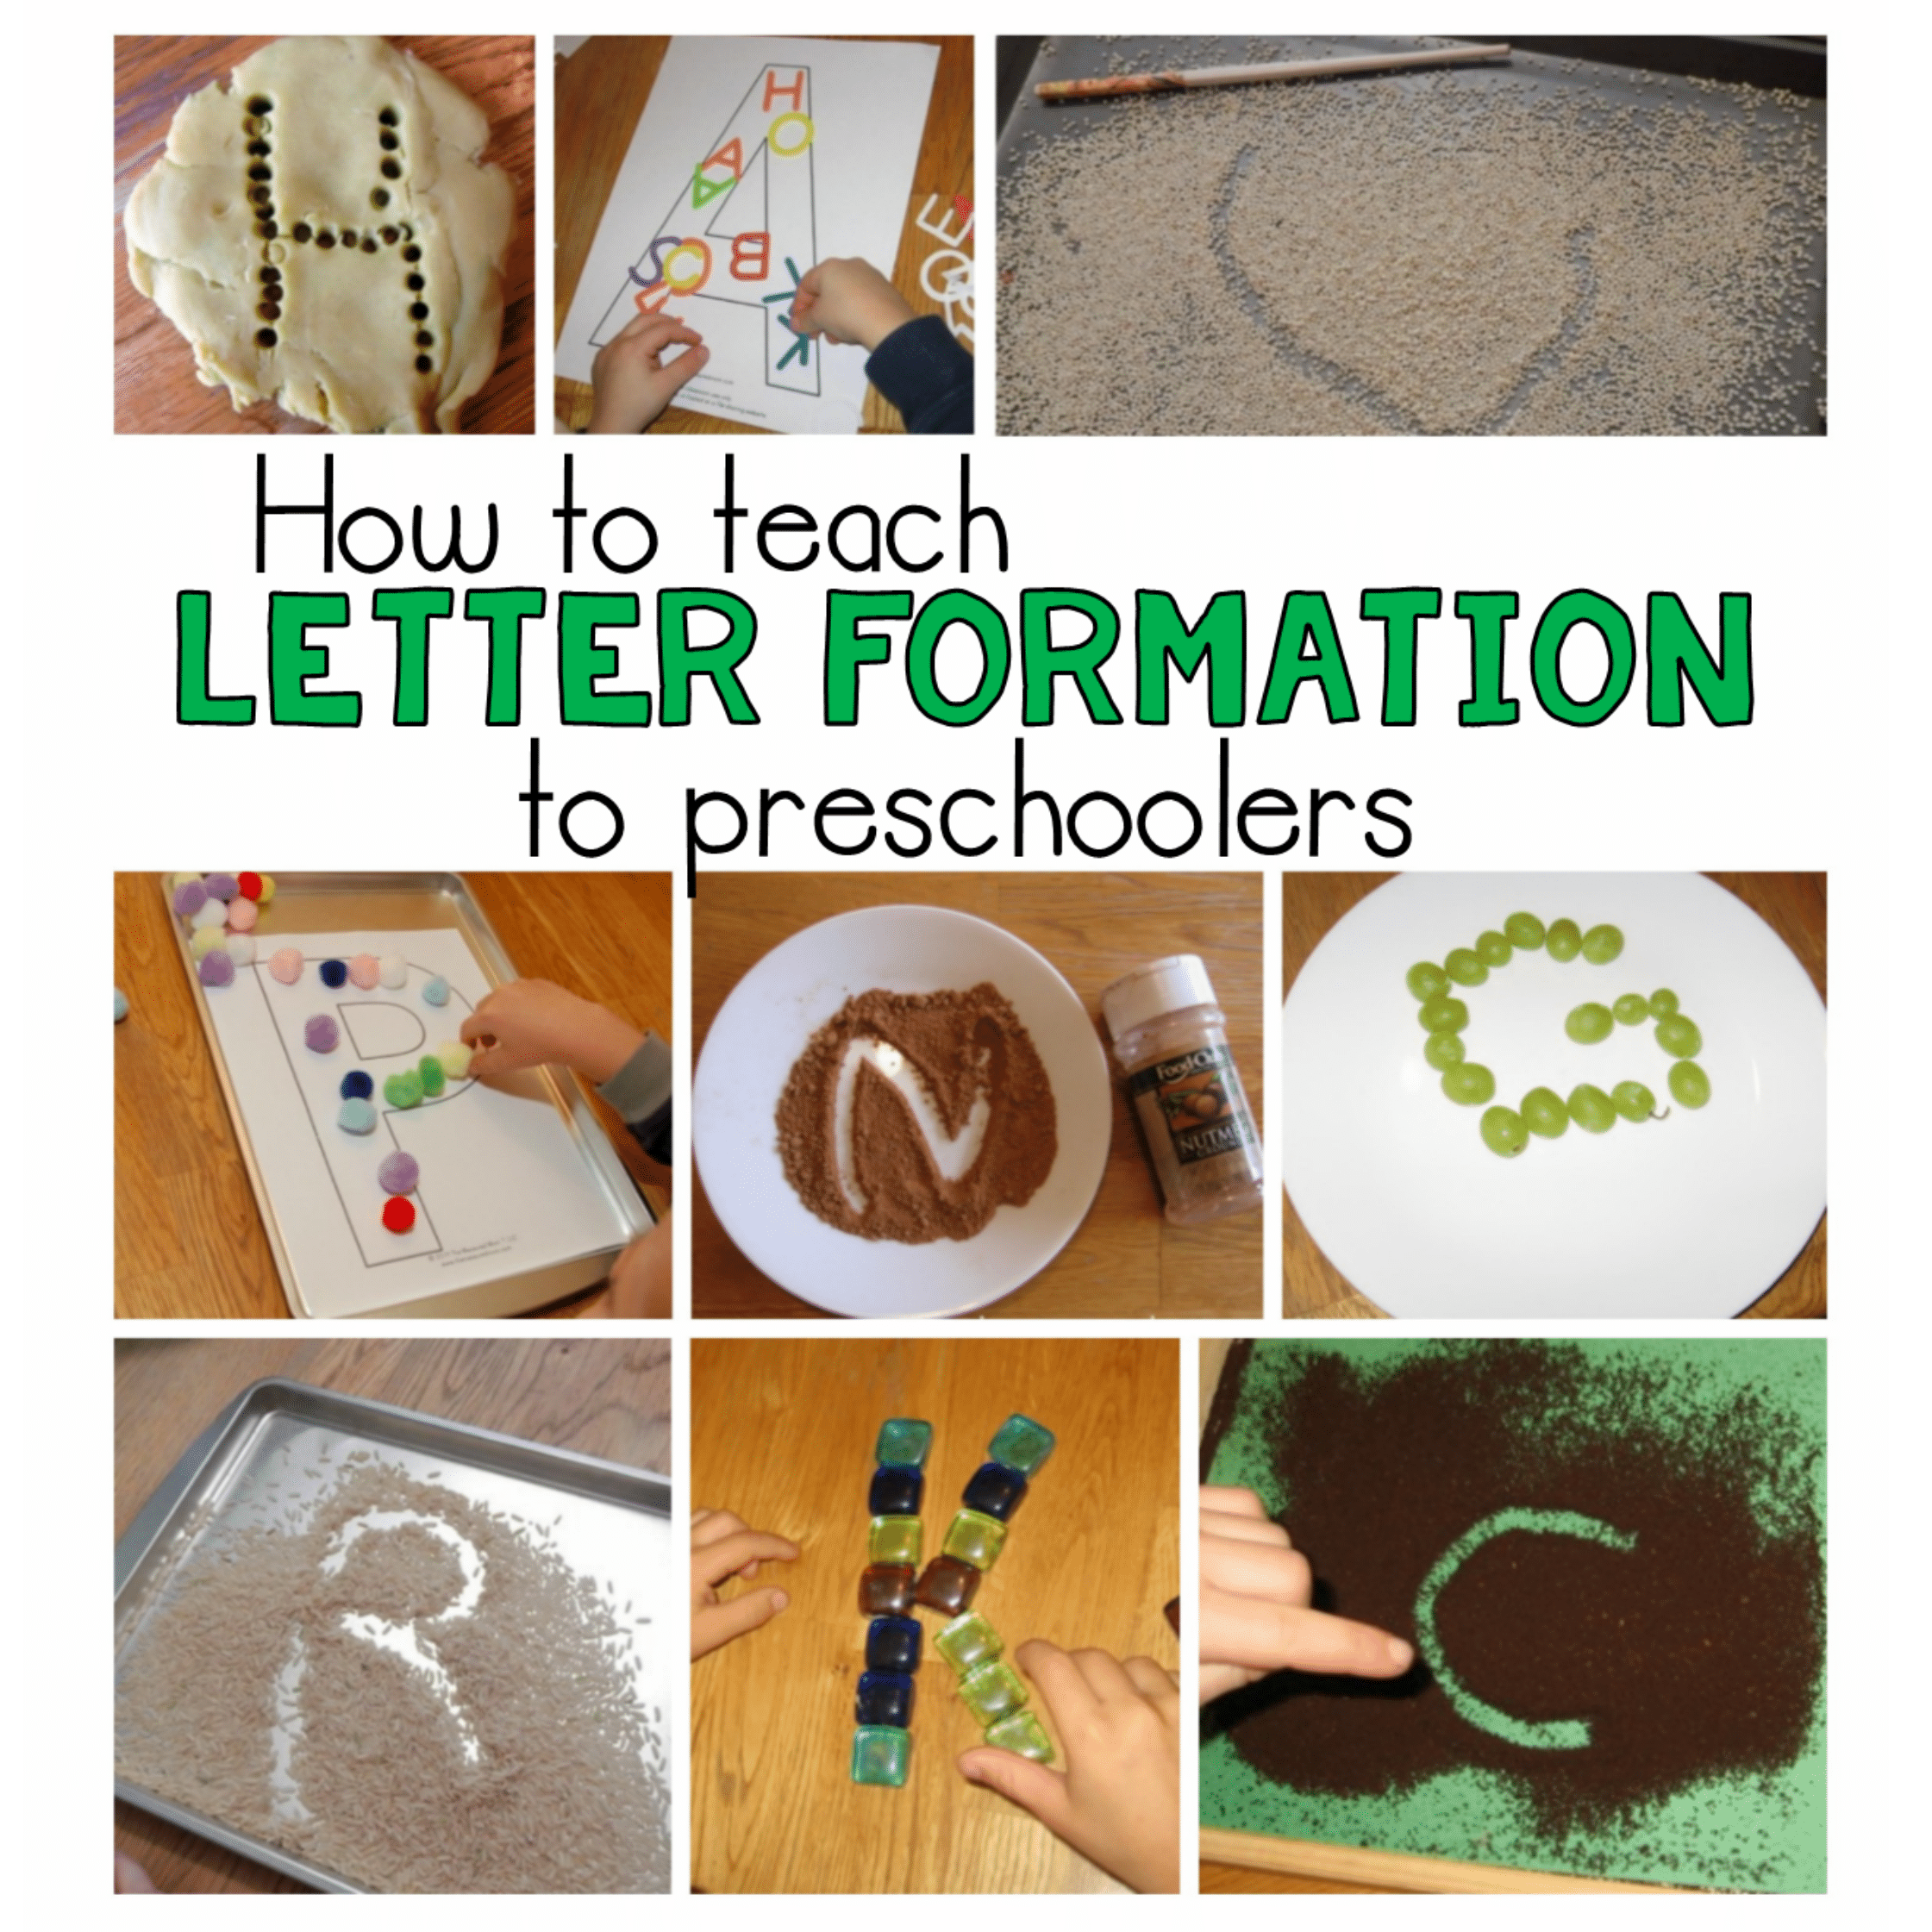 How To Teach Letter Formation To Preschoolers